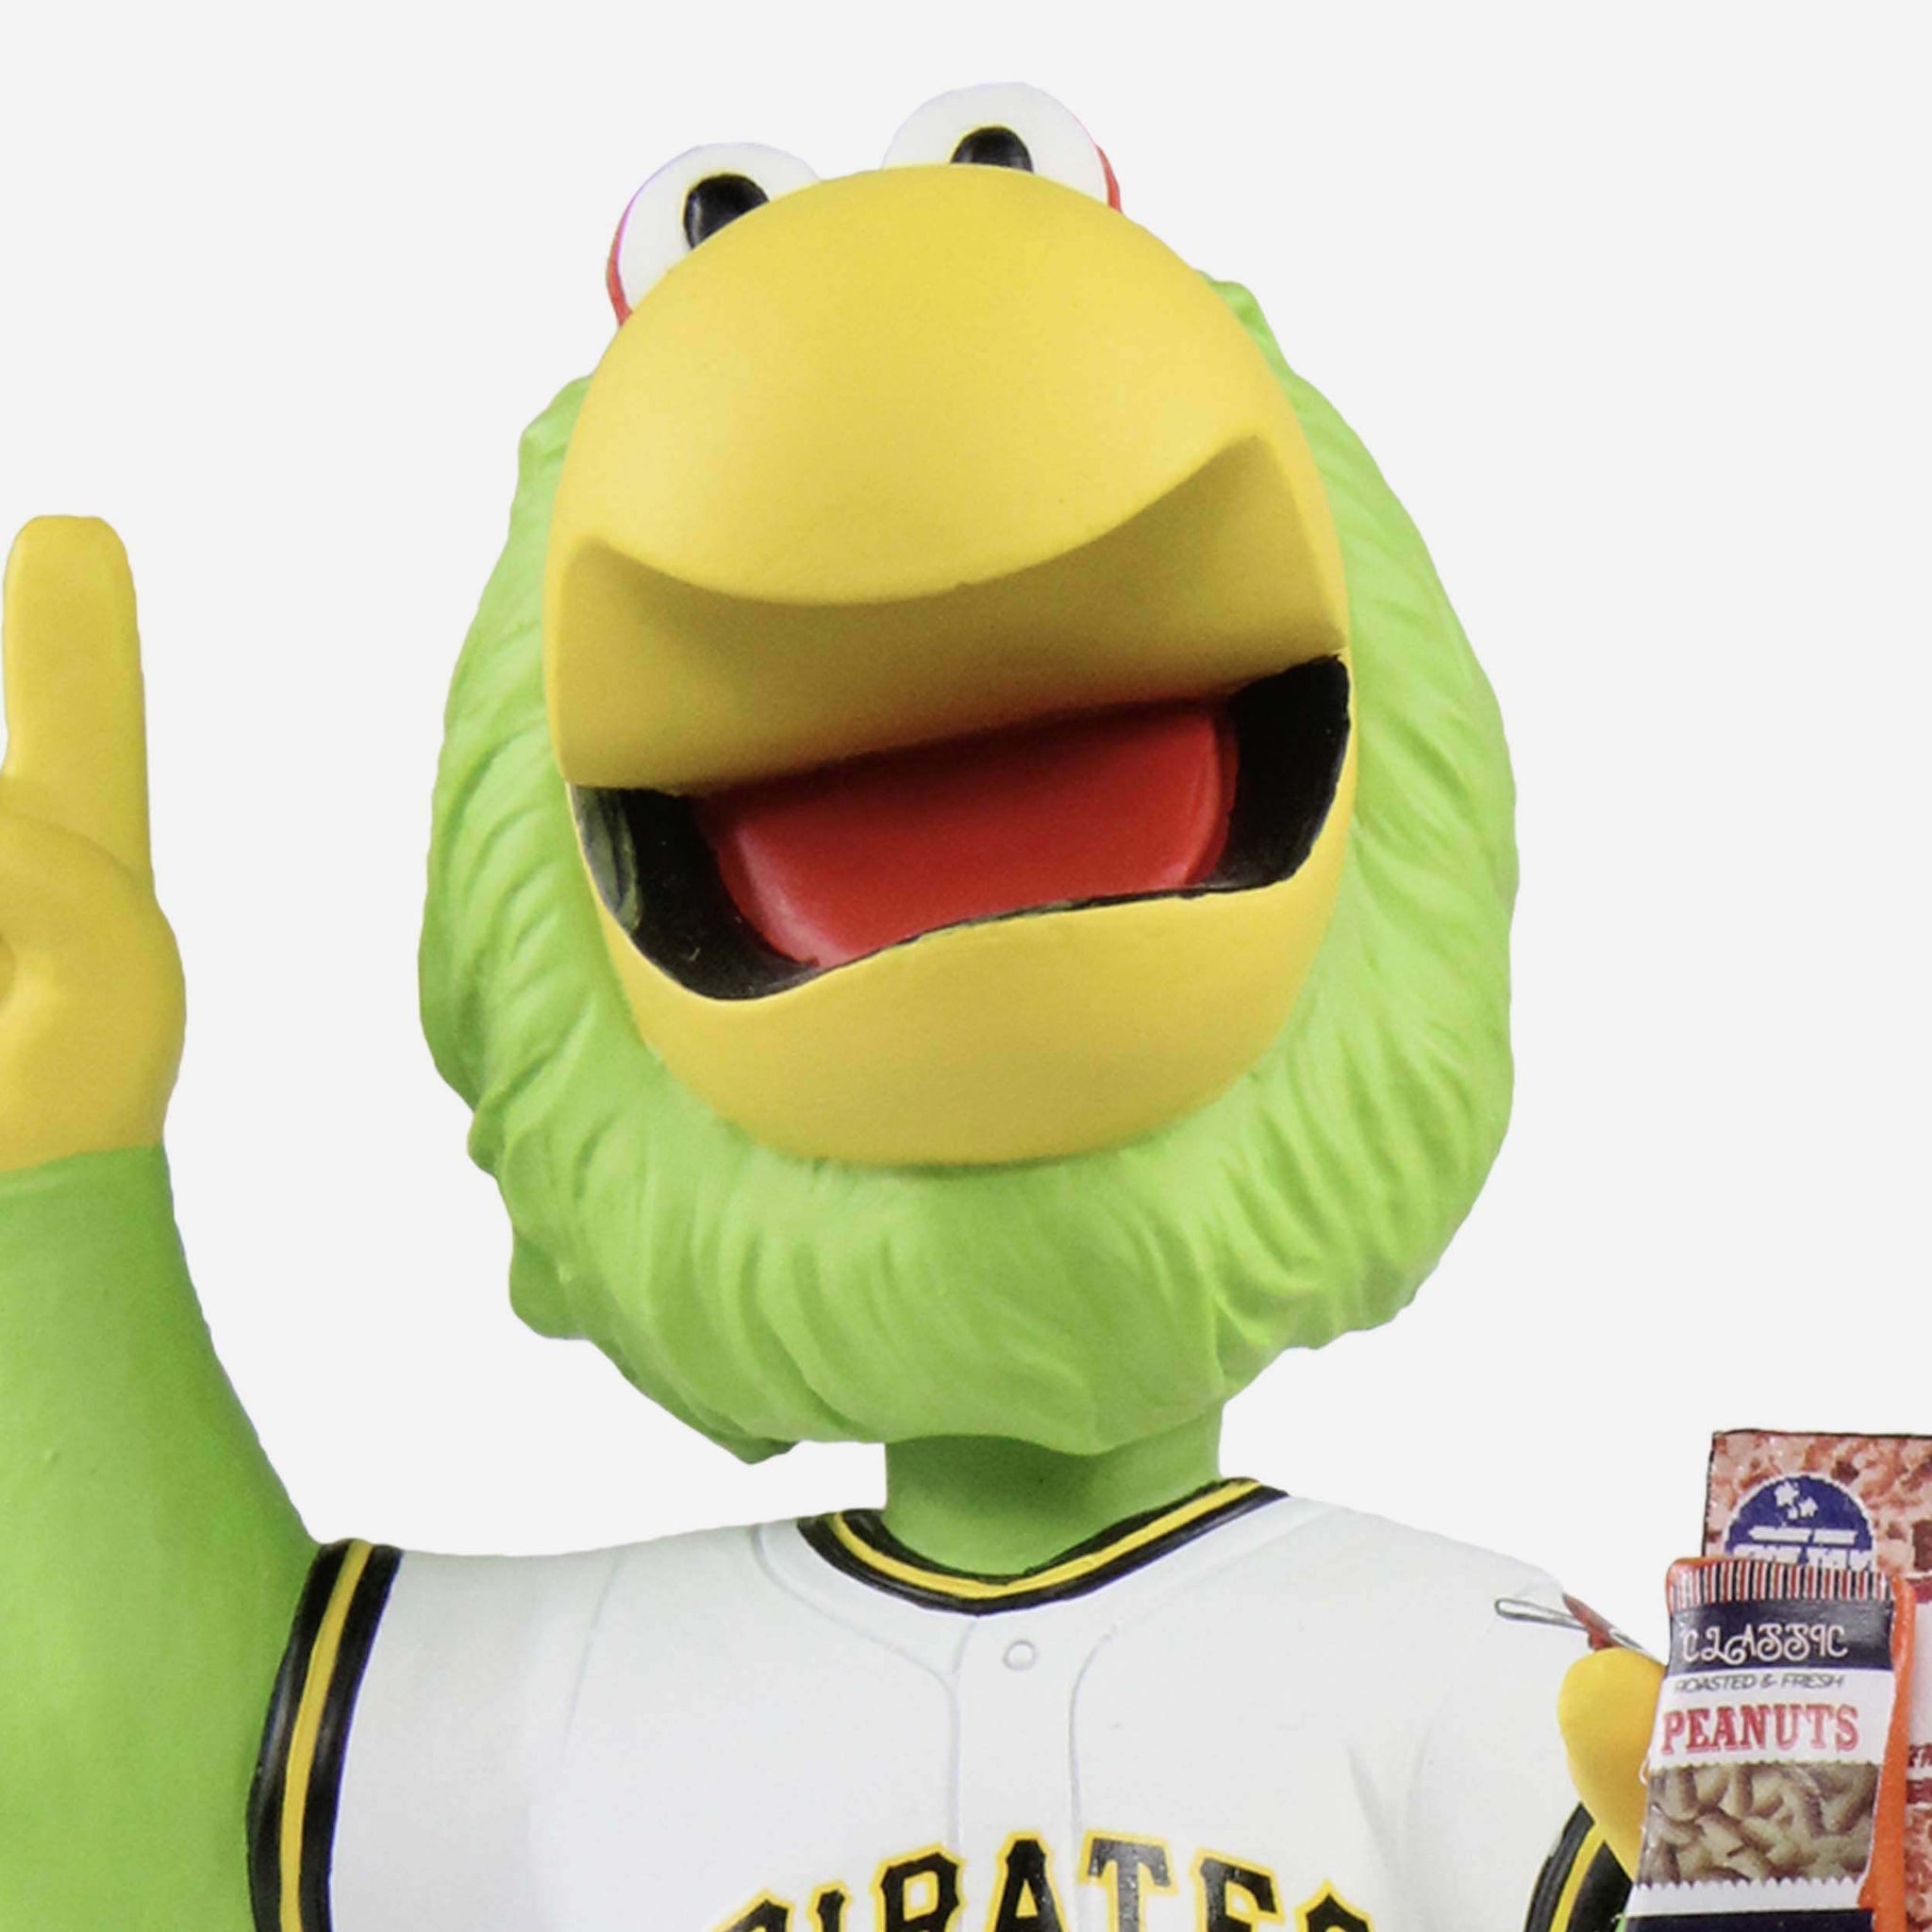 Pittsburgh Pirates - Happy National Bird Day to our favorite bird! 💛